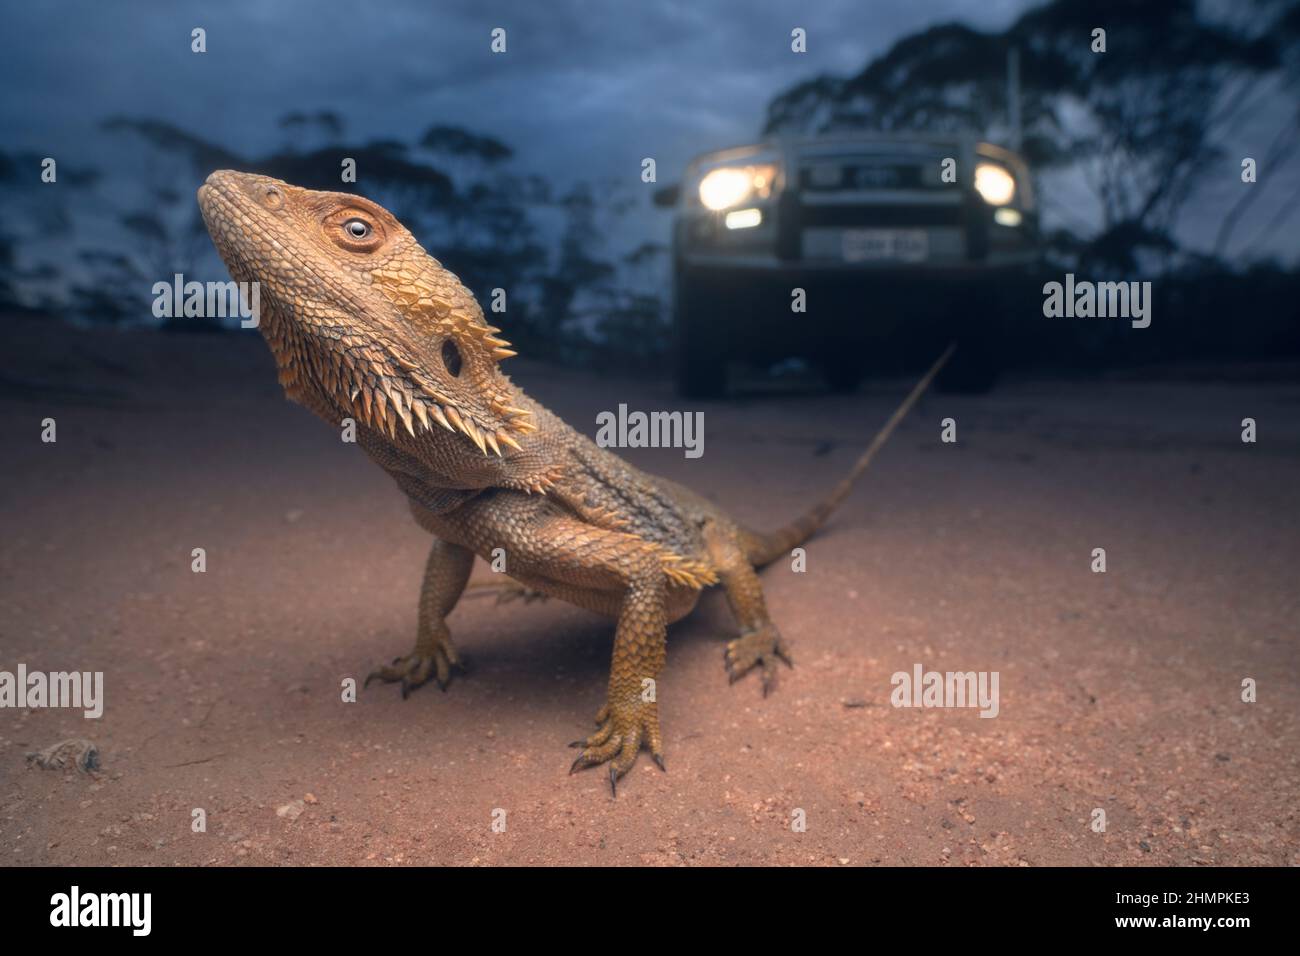 Wild bearded dragon (Pogona vitticeps) standing in the middle of a dirt road at dusk with vehicle in background, Australia Stock Photo